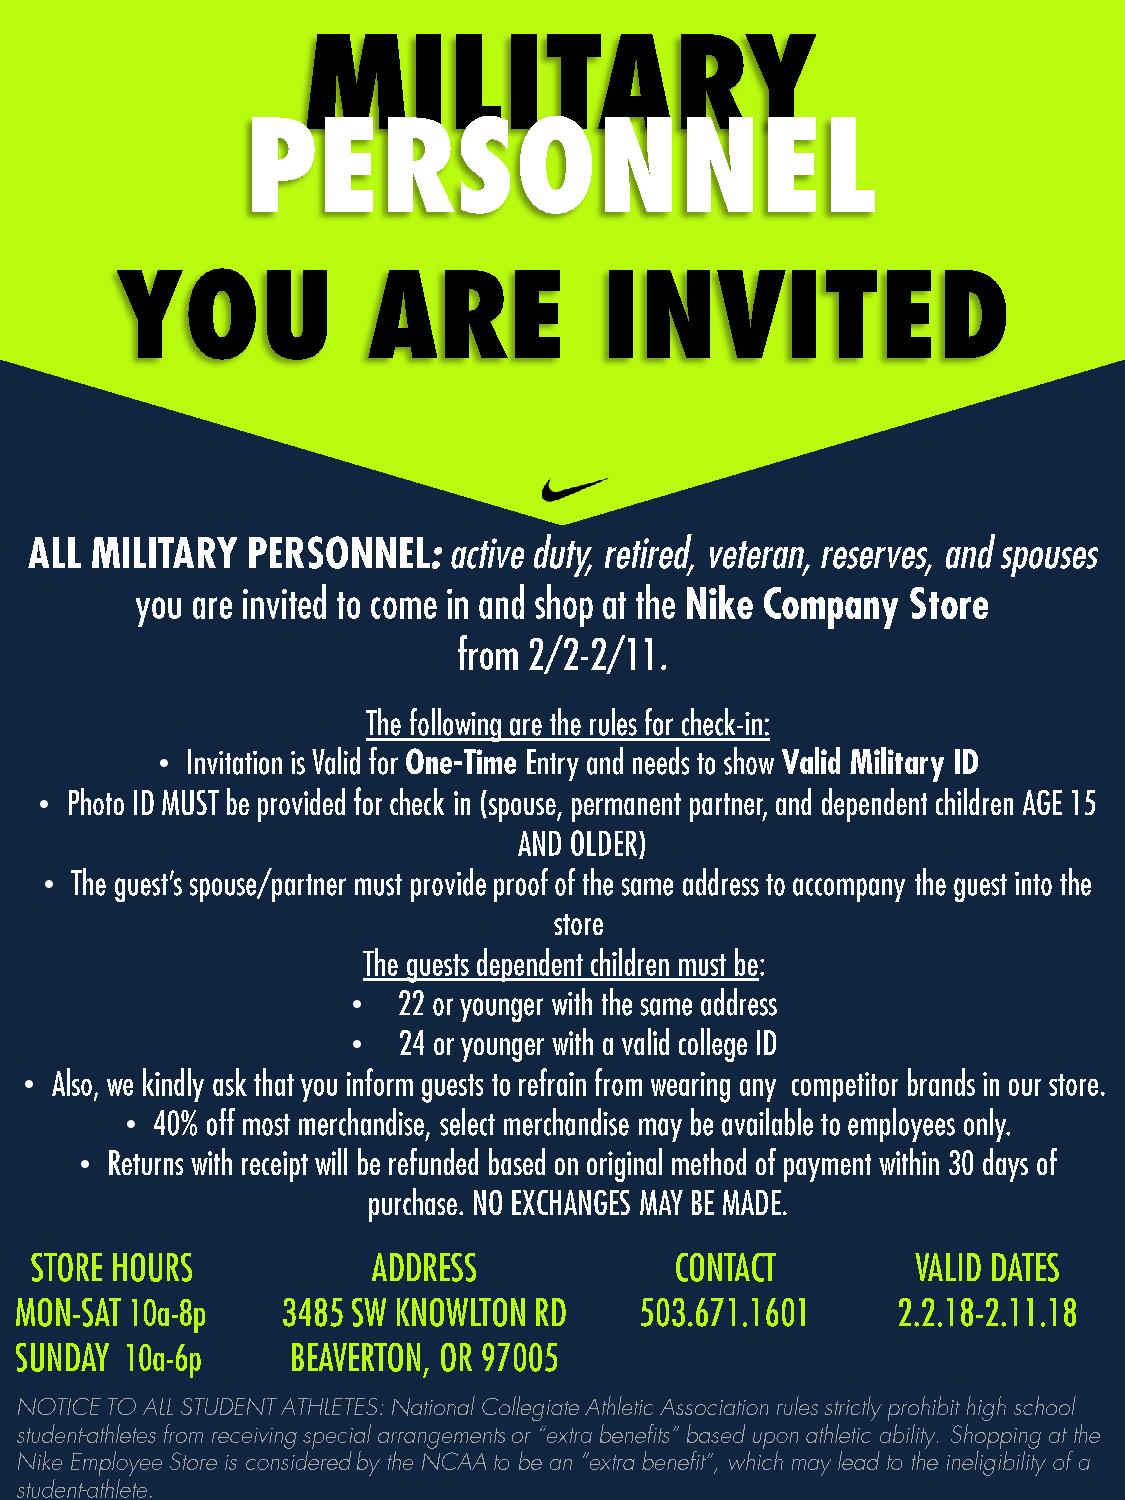 how to apply military discount online nike